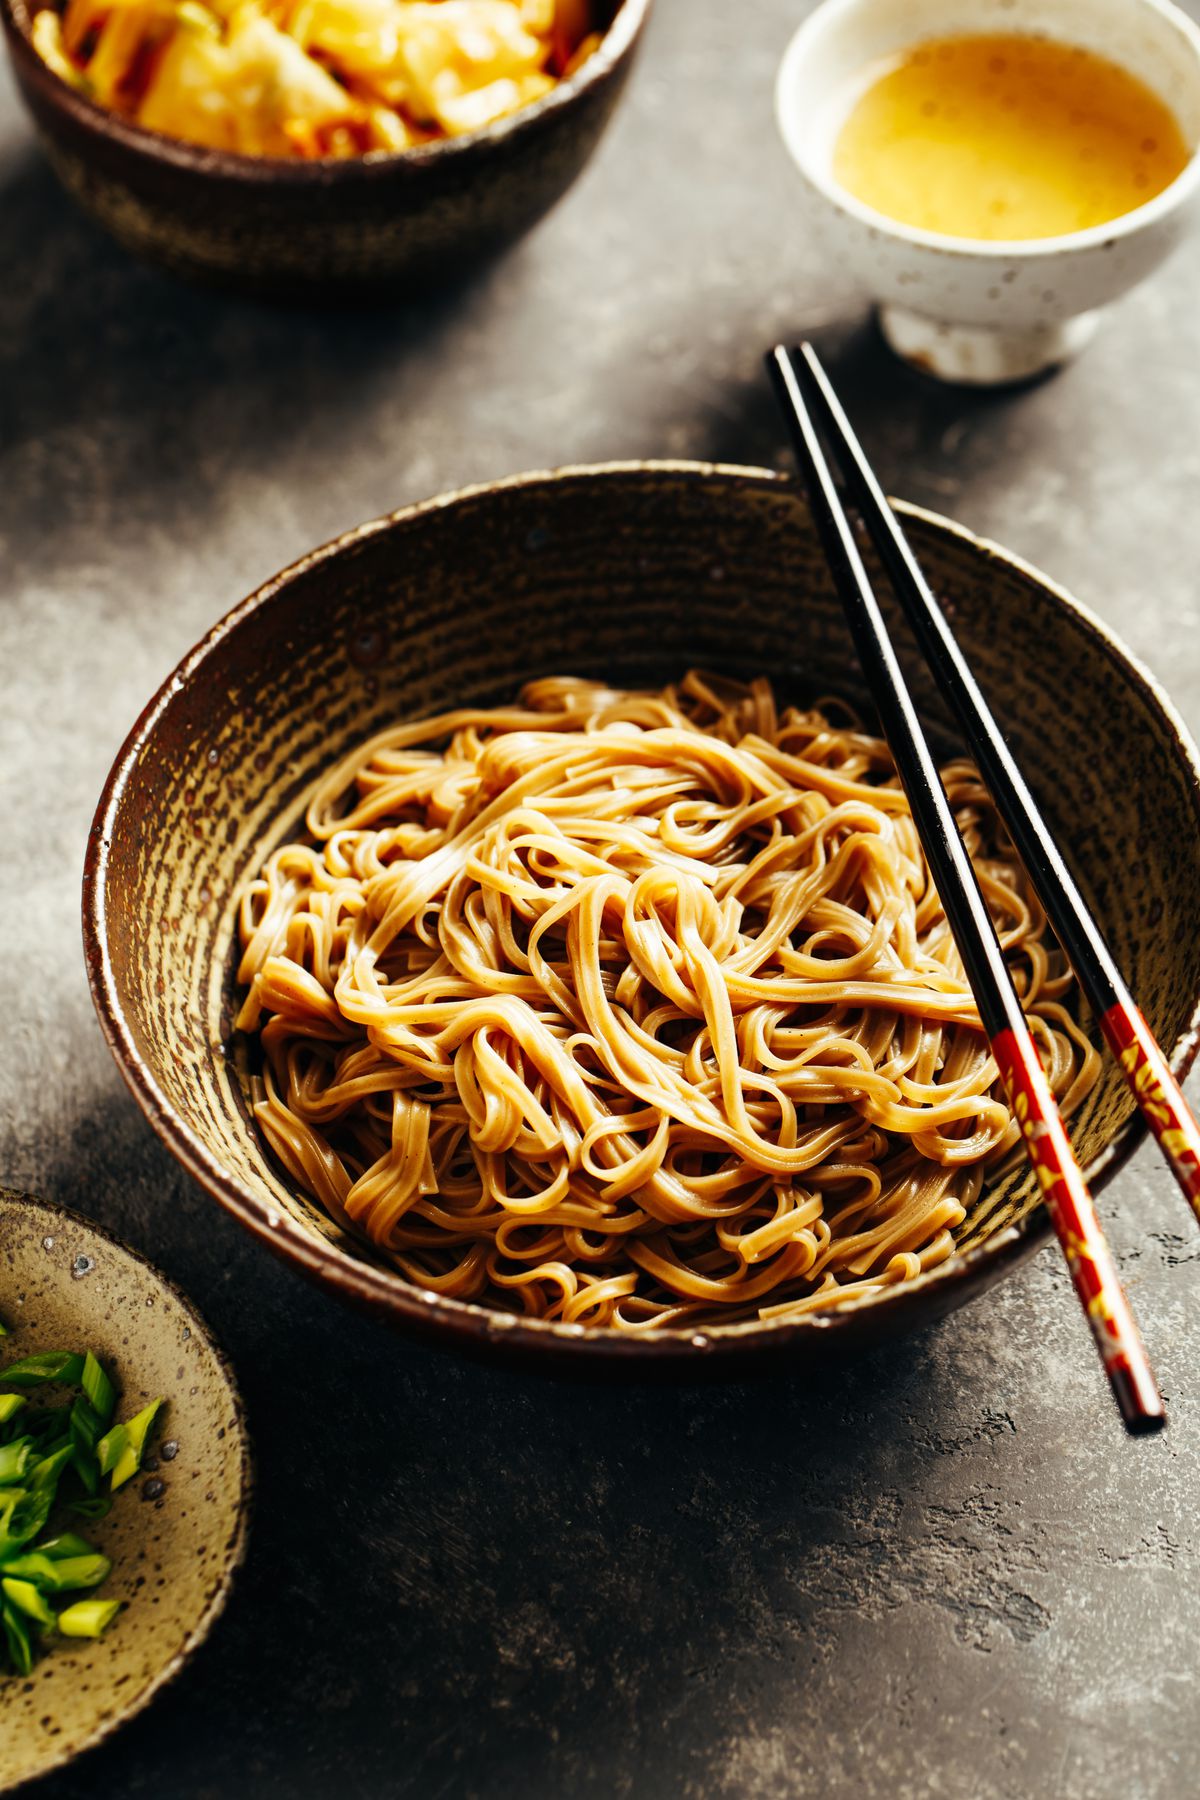 Enjoy a bowl of soba noodles on New Year’s Eve. They’re thought to symbolize long life.